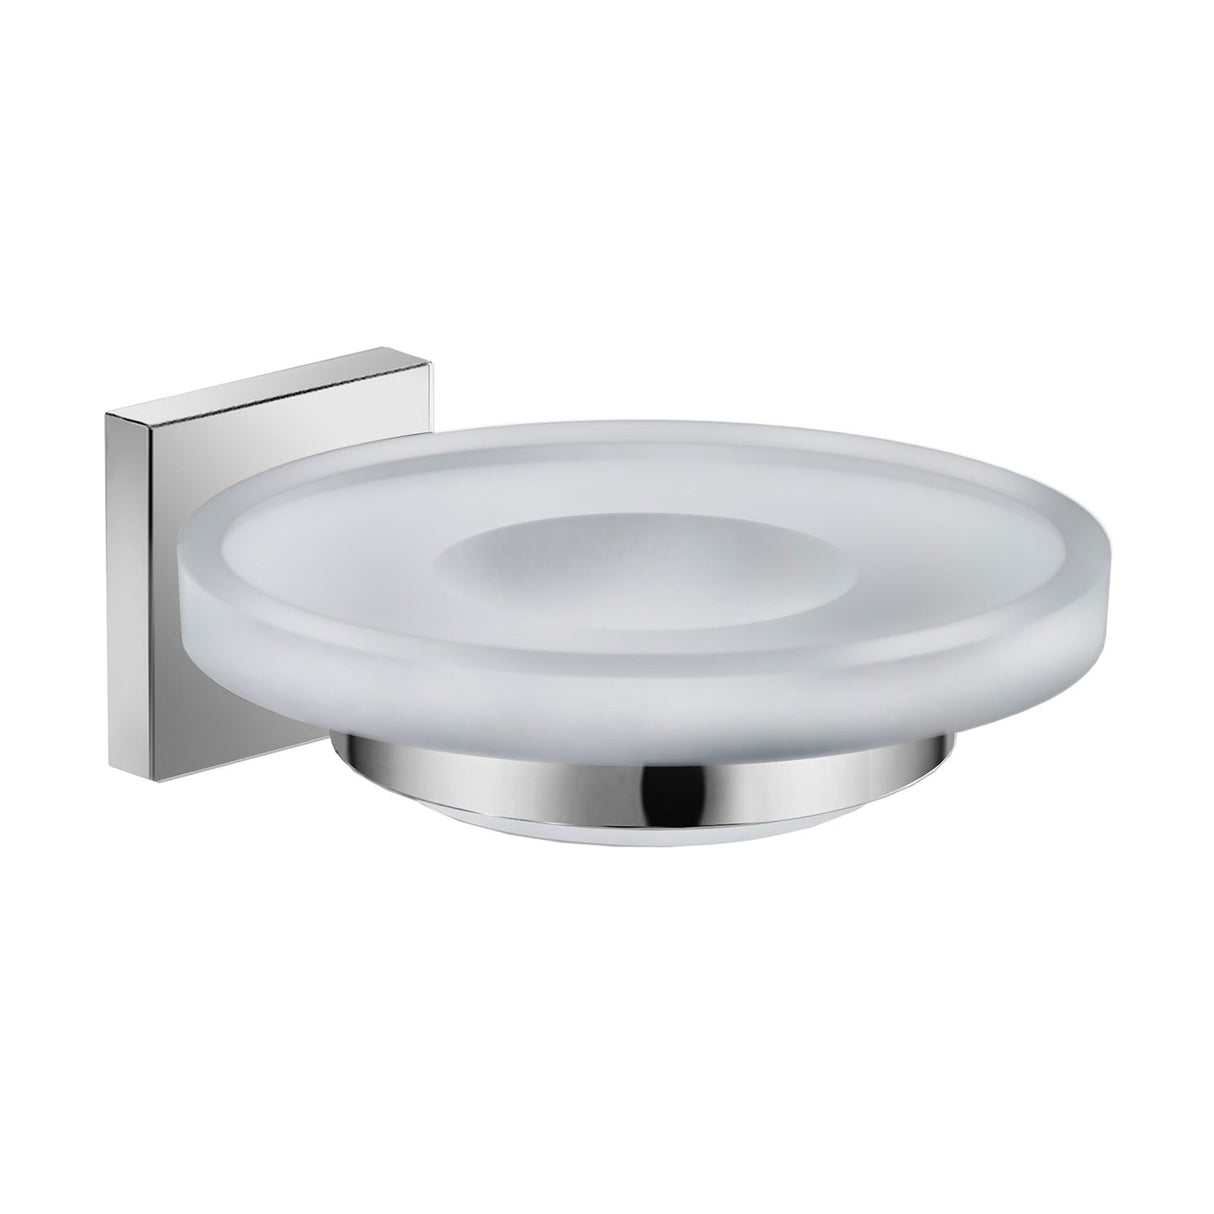 DAX Milano Brass and Glass Soap Dish Tray with Wall Mount, Chrome DAX-GDC160132-CR